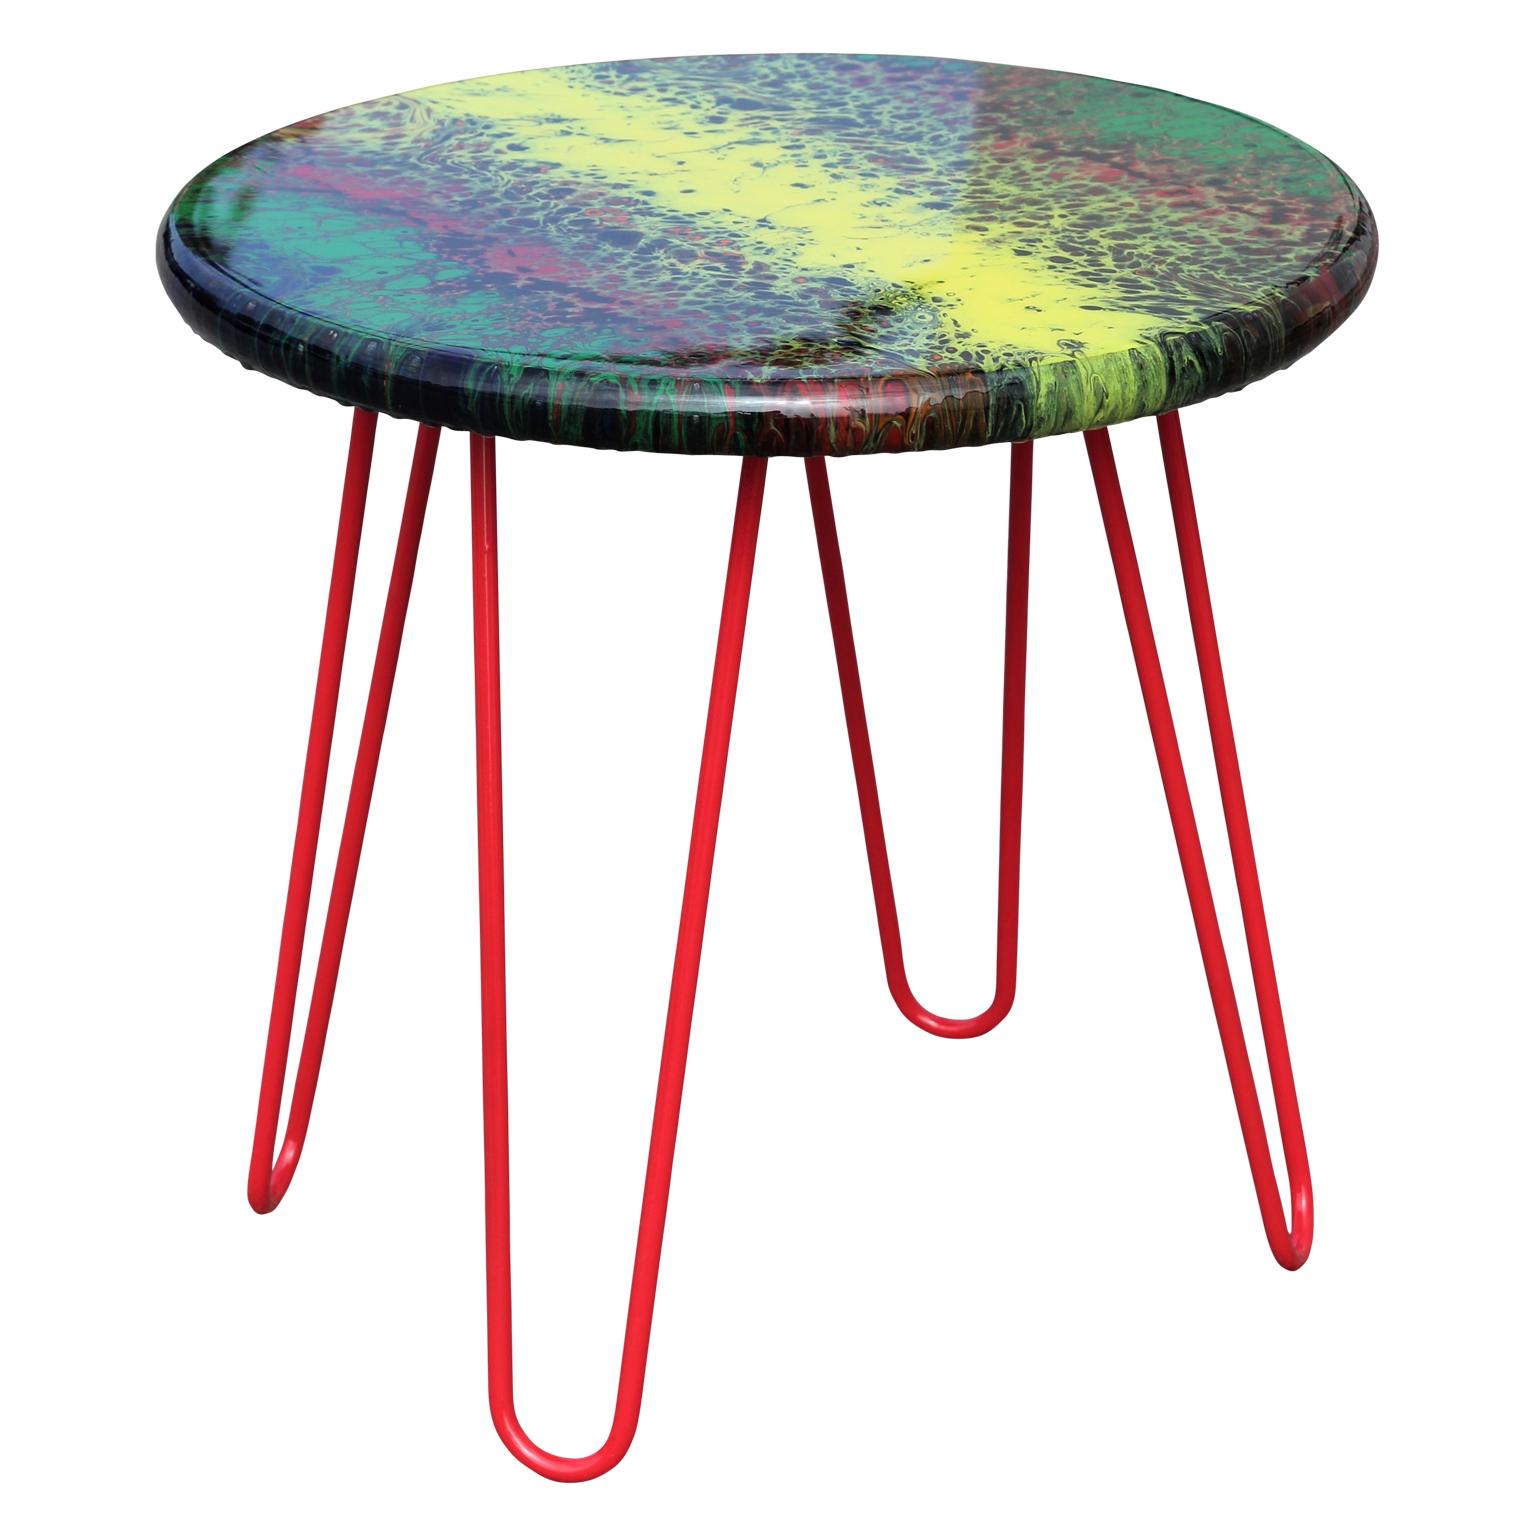 American Custom Colorful Abstract Yellow, Green, Red, and Black Acrylic Fluid Side Table